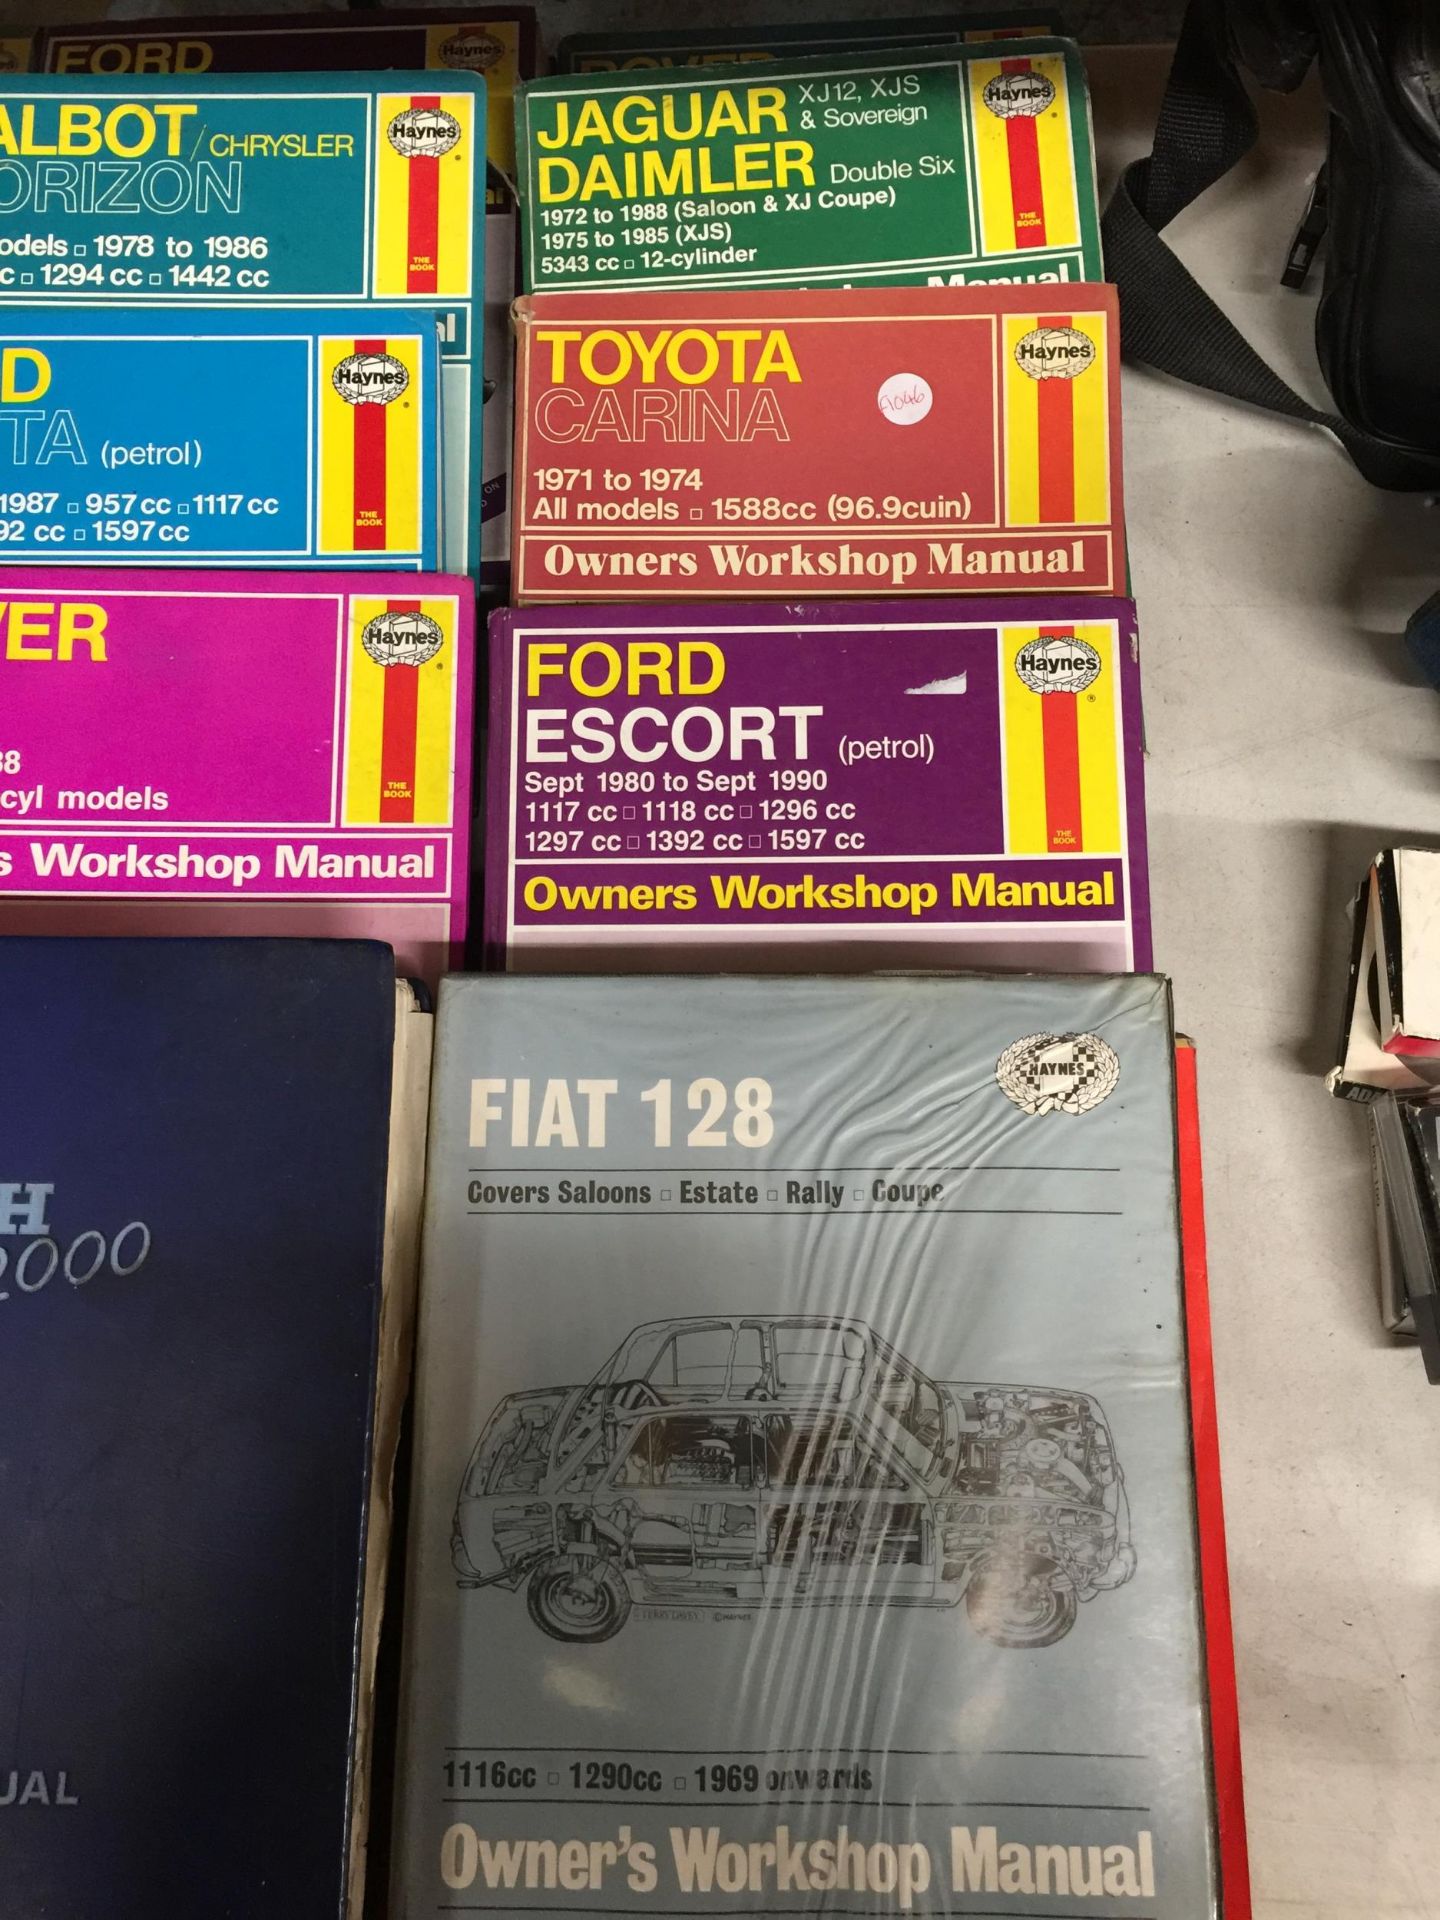 A LARGE QUANTITY OF HAYNES OWNERS WORKSHOP MANUALS TO INCLUDE JAGUAR DAIMLER, ROVER, BMW, TRIUMPH - Image 3 of 3